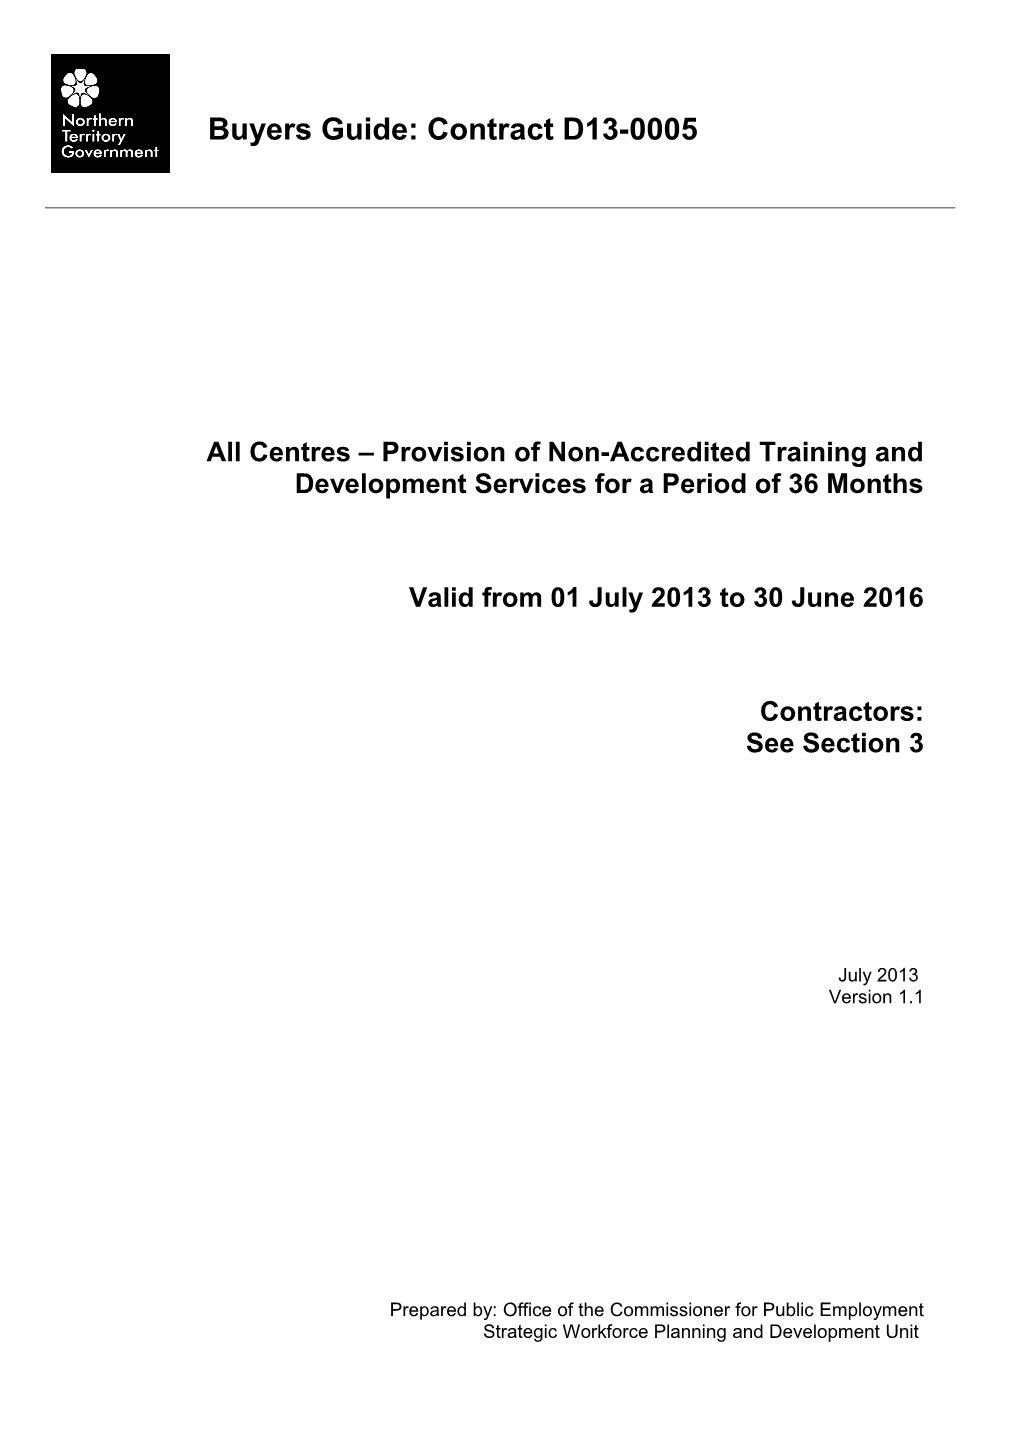 All Centres Provision of Non-Accredited Training and Development Services for a Period